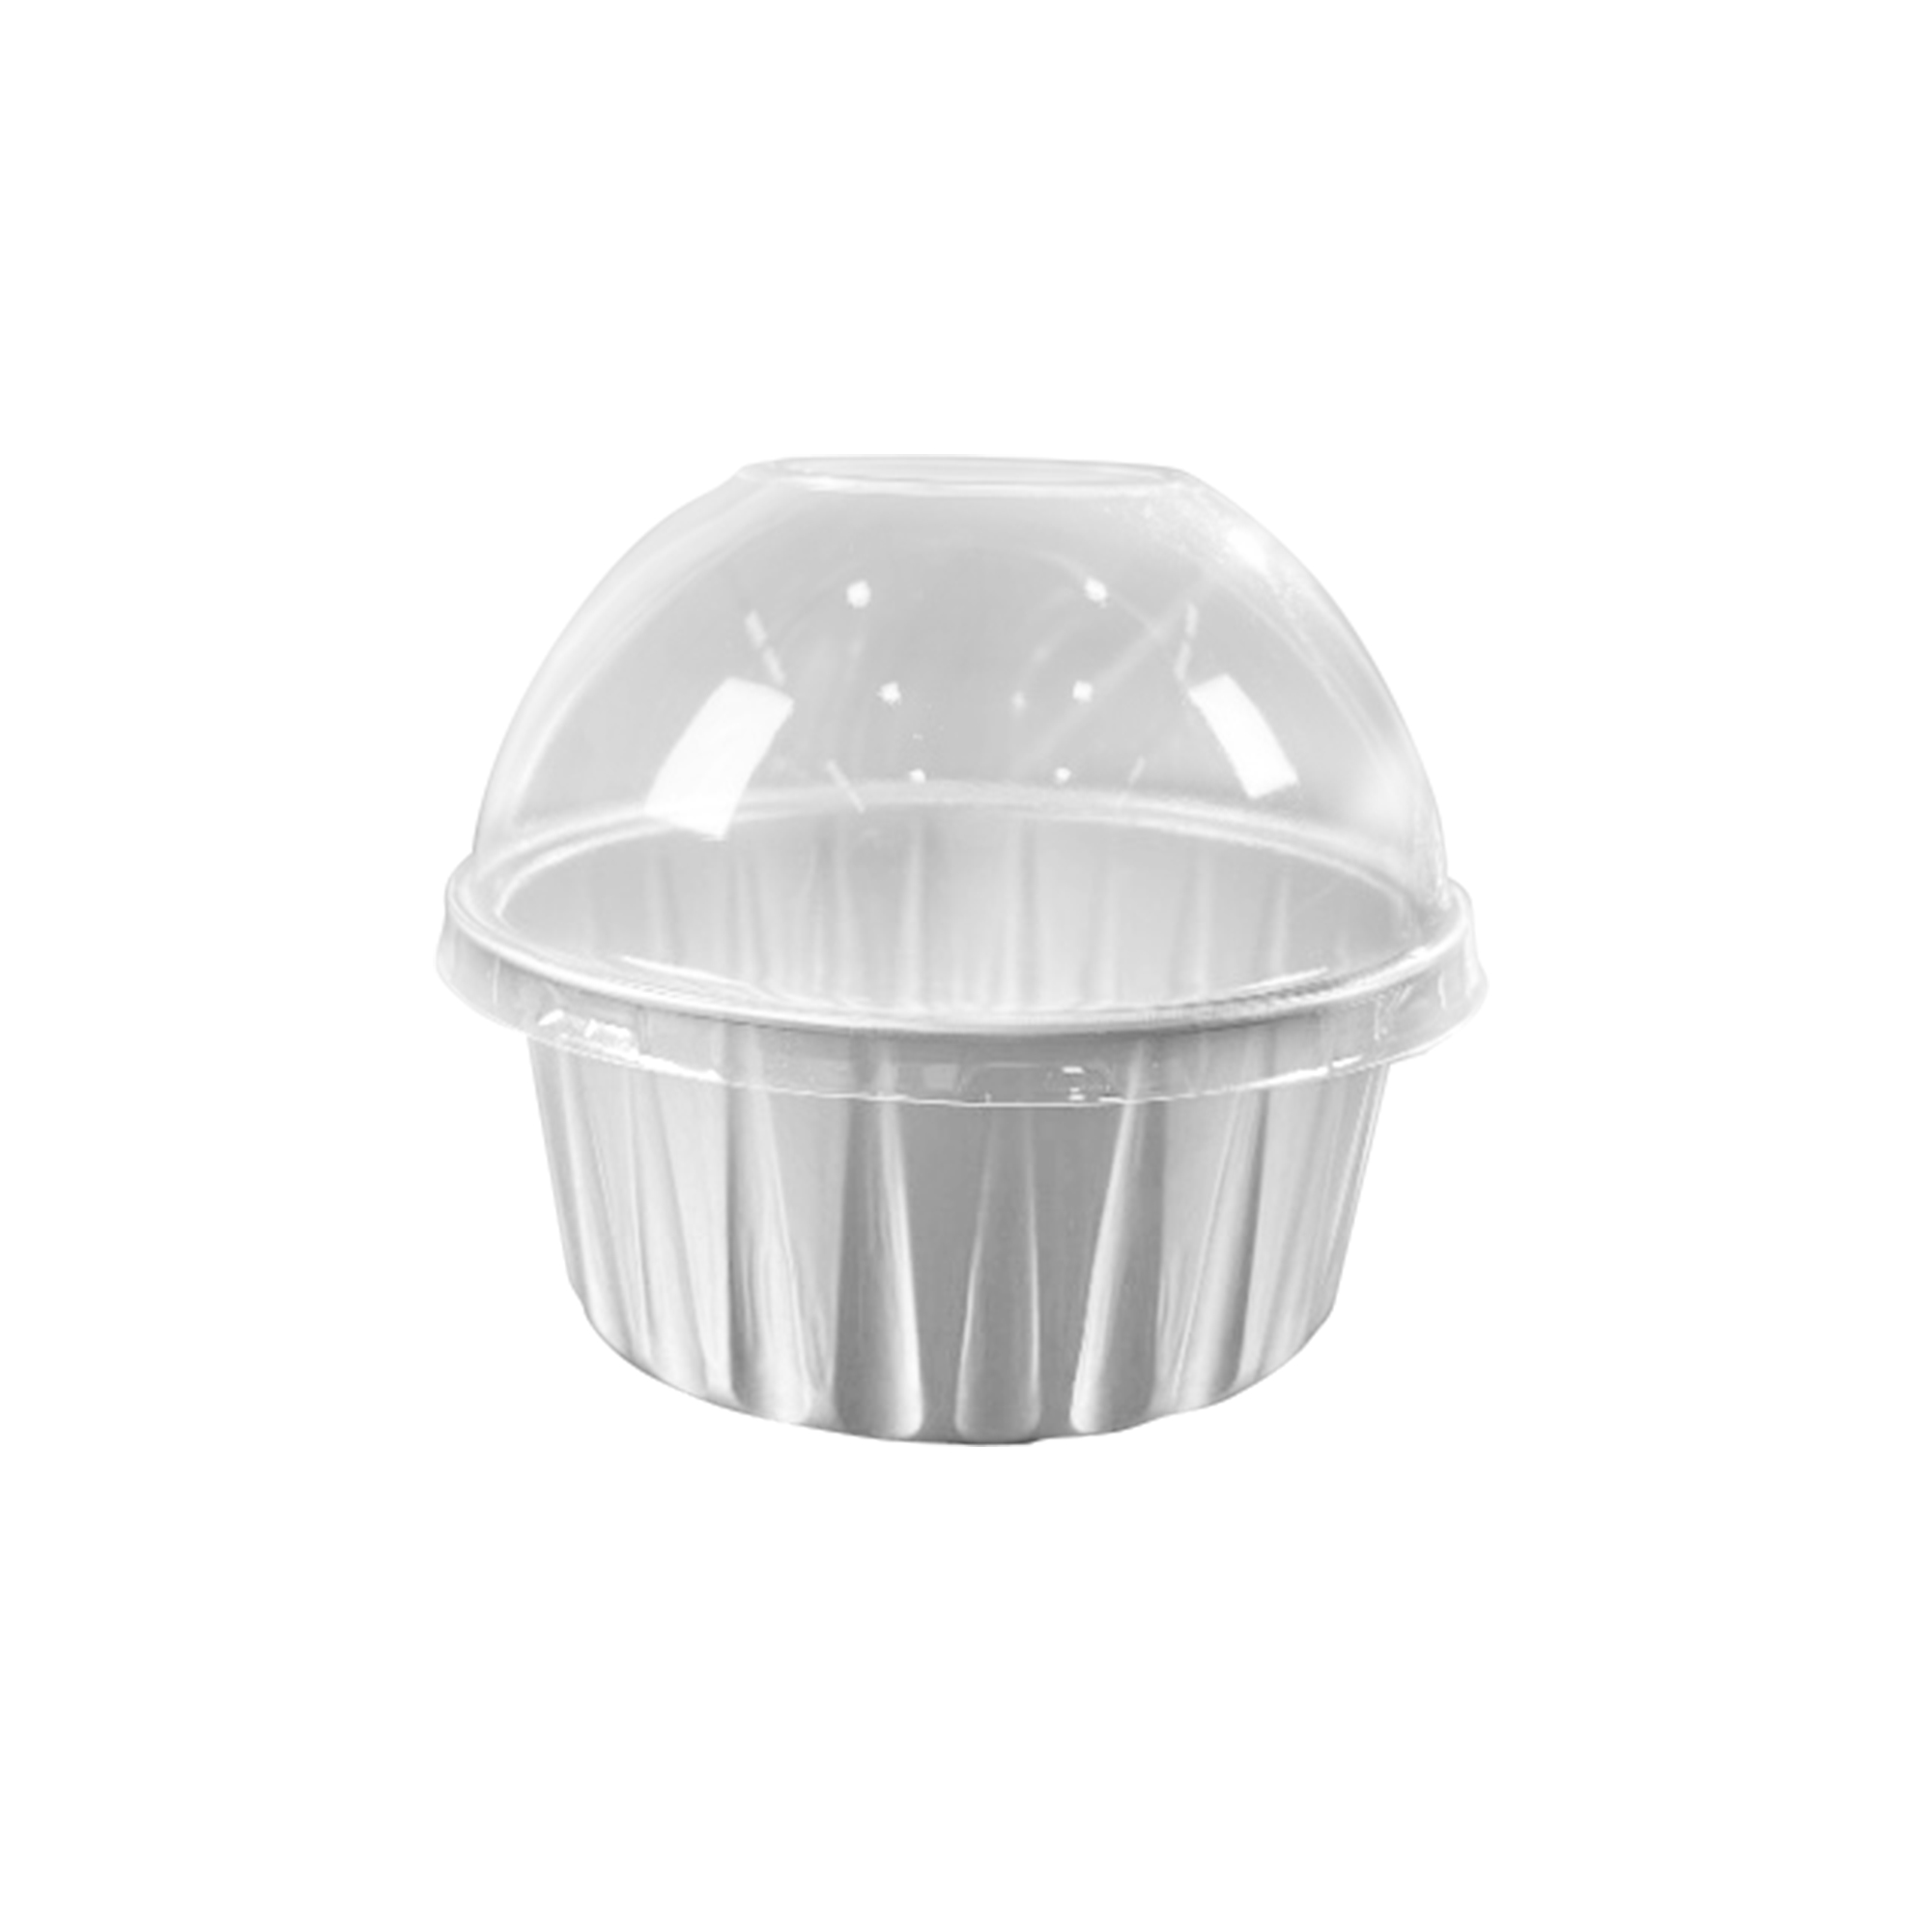 4oz Round Aluminum Baking Cup With Dome Lid 50pc/pack - White